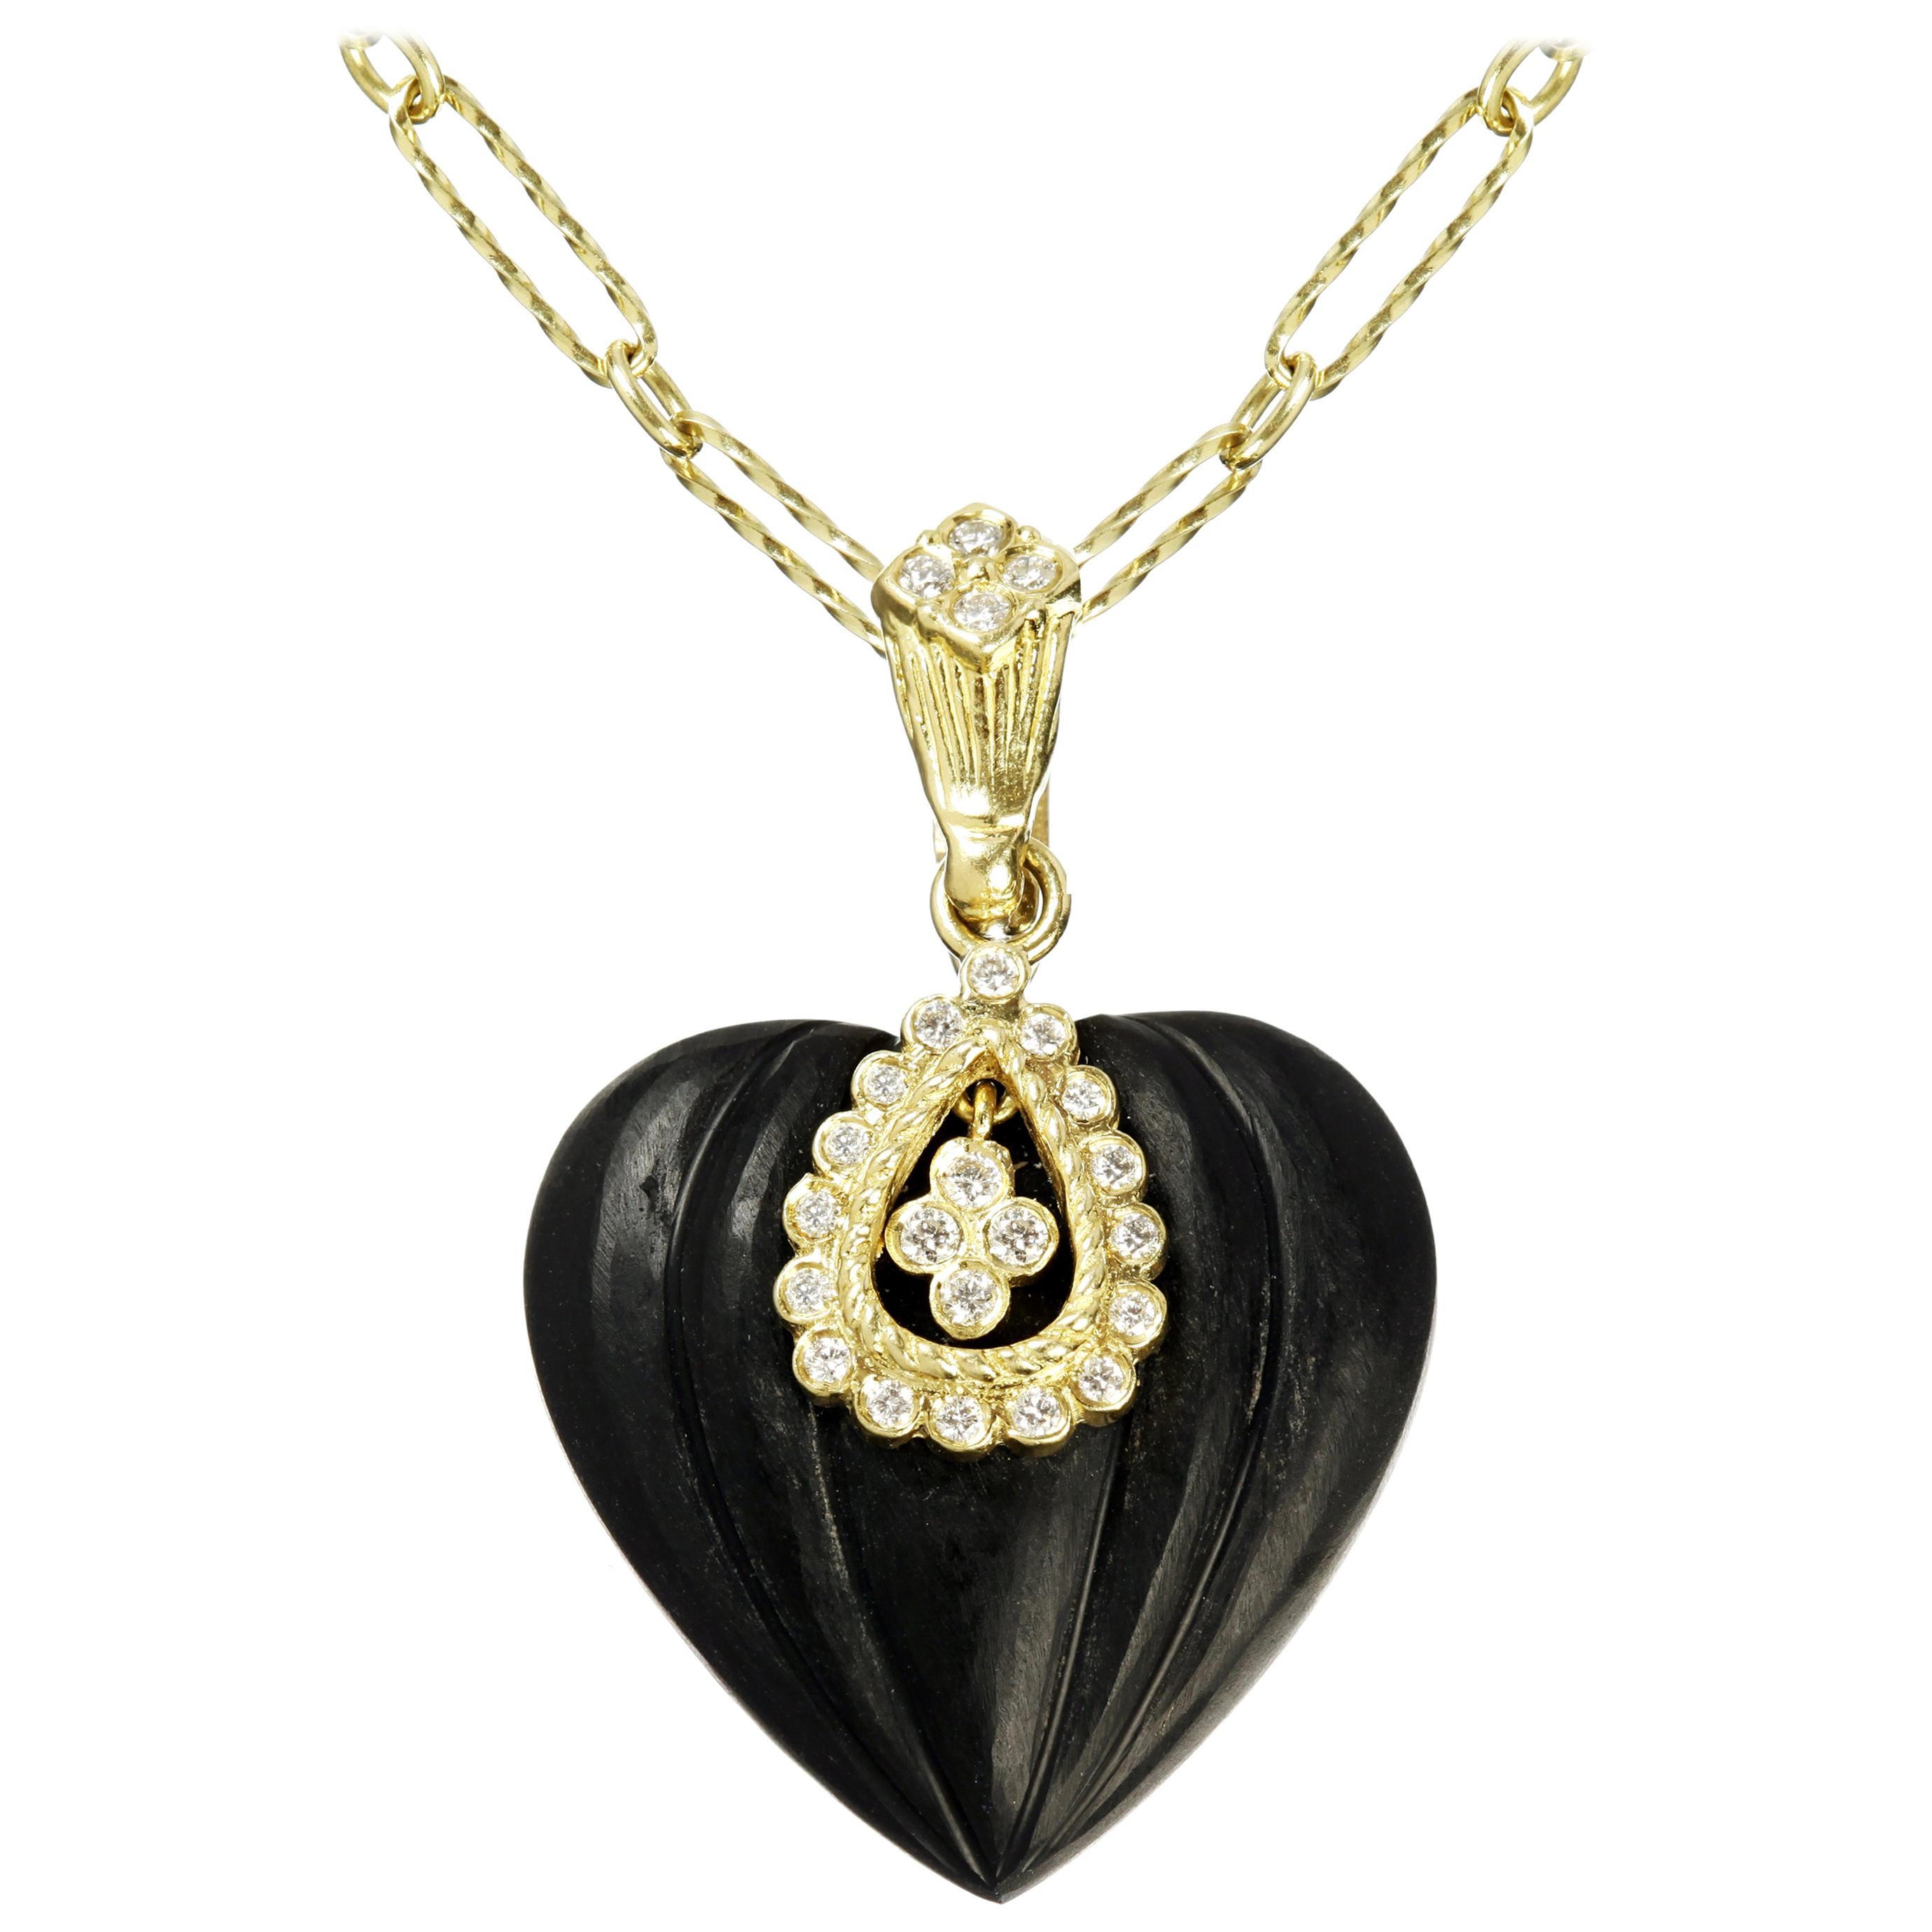 Stambolian Yellow Gold and Diamond Onyx Heart Pendant with Chain Necklace